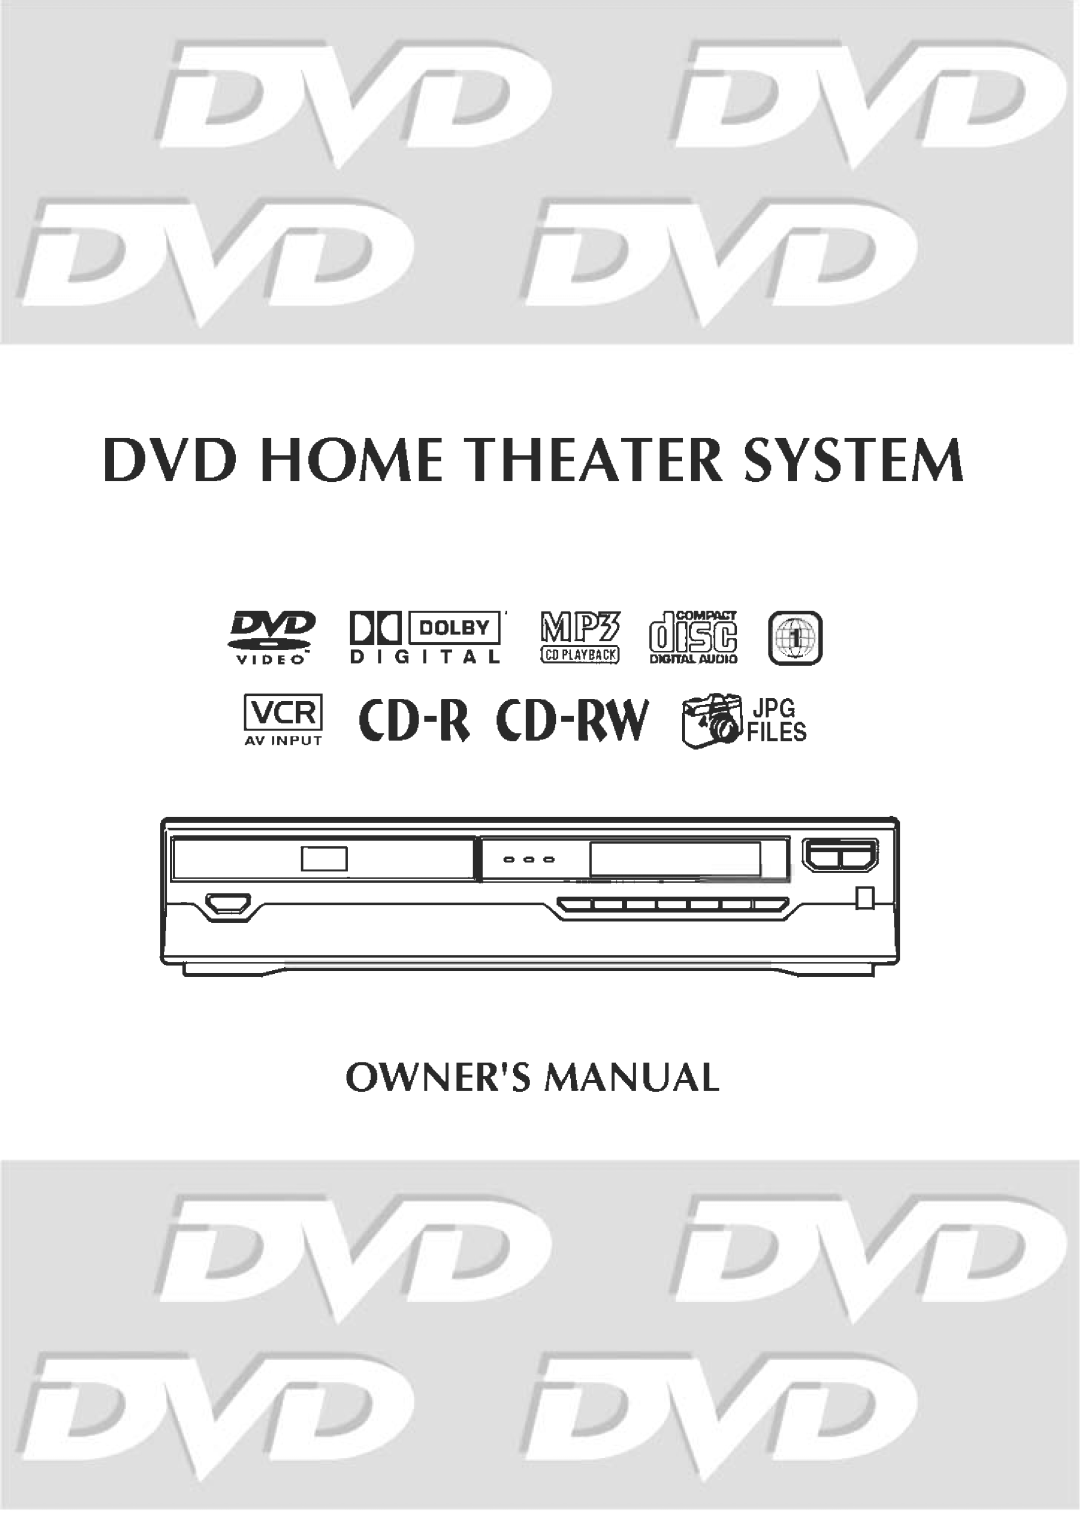 Audiovox DVD Home Theater System manual 